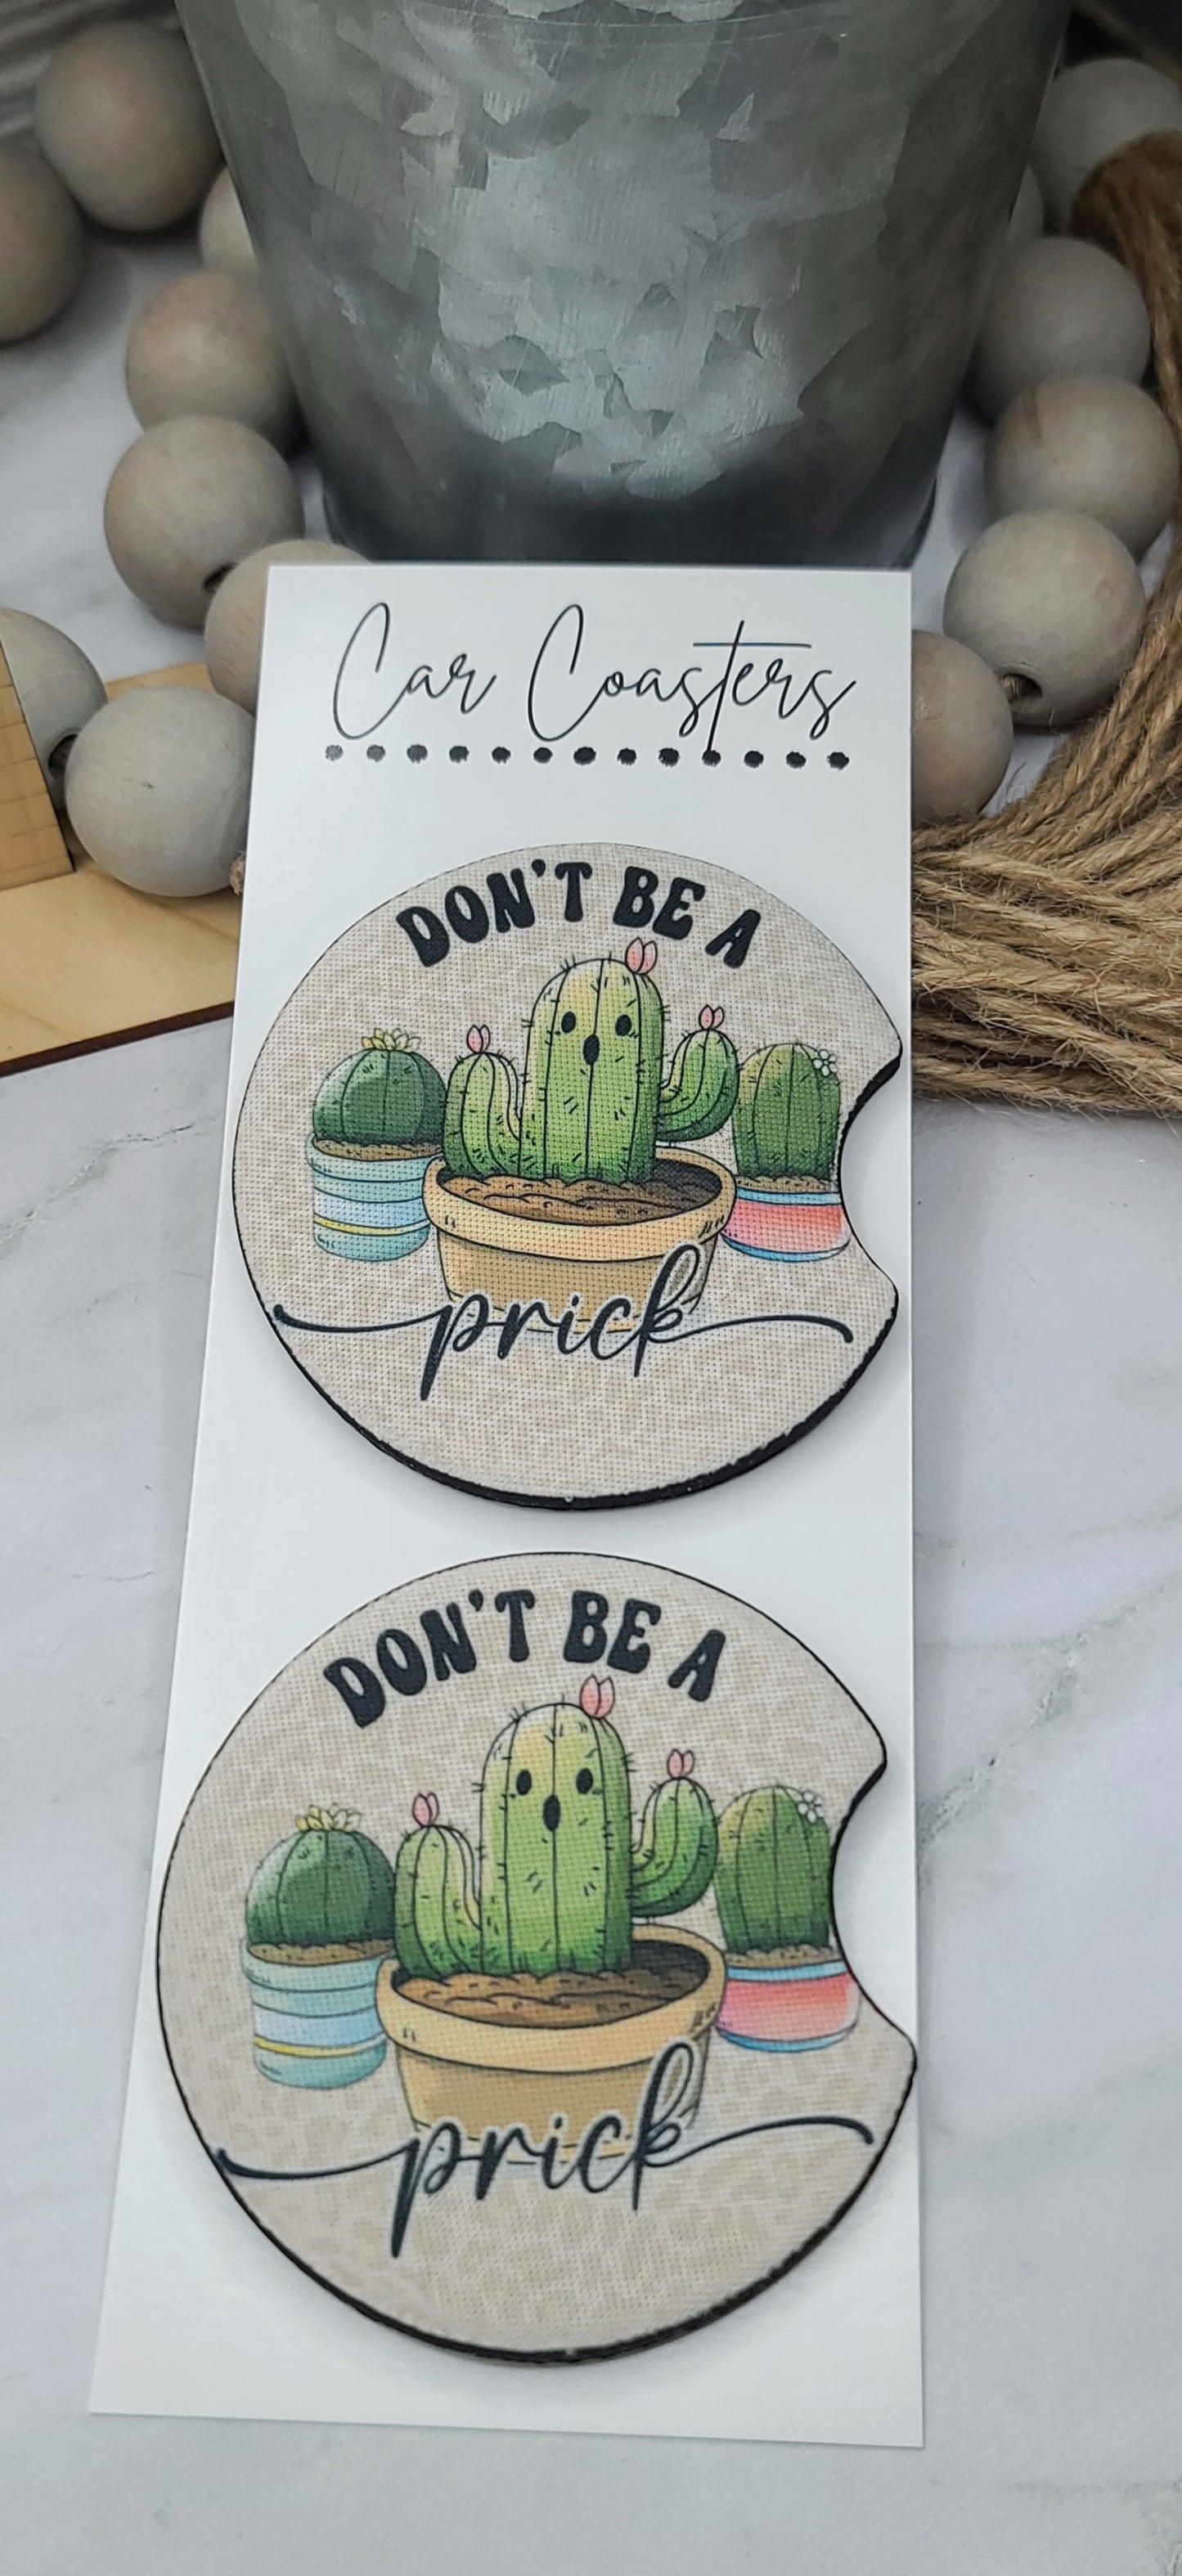 Don't Be A Prick Car Coasters